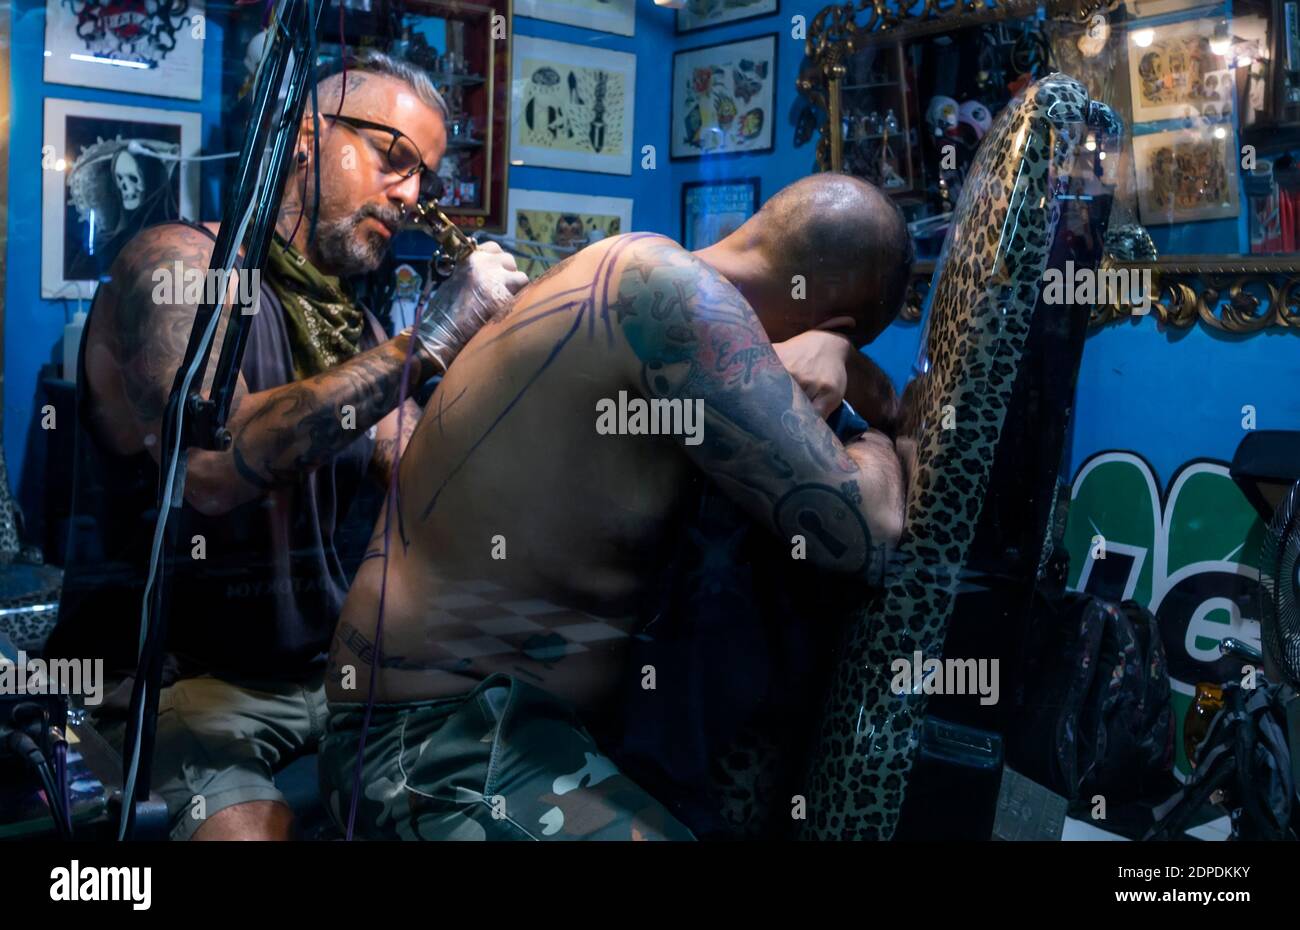 Man gets tattooed in Buenos Aires, Argentina Stock Photo